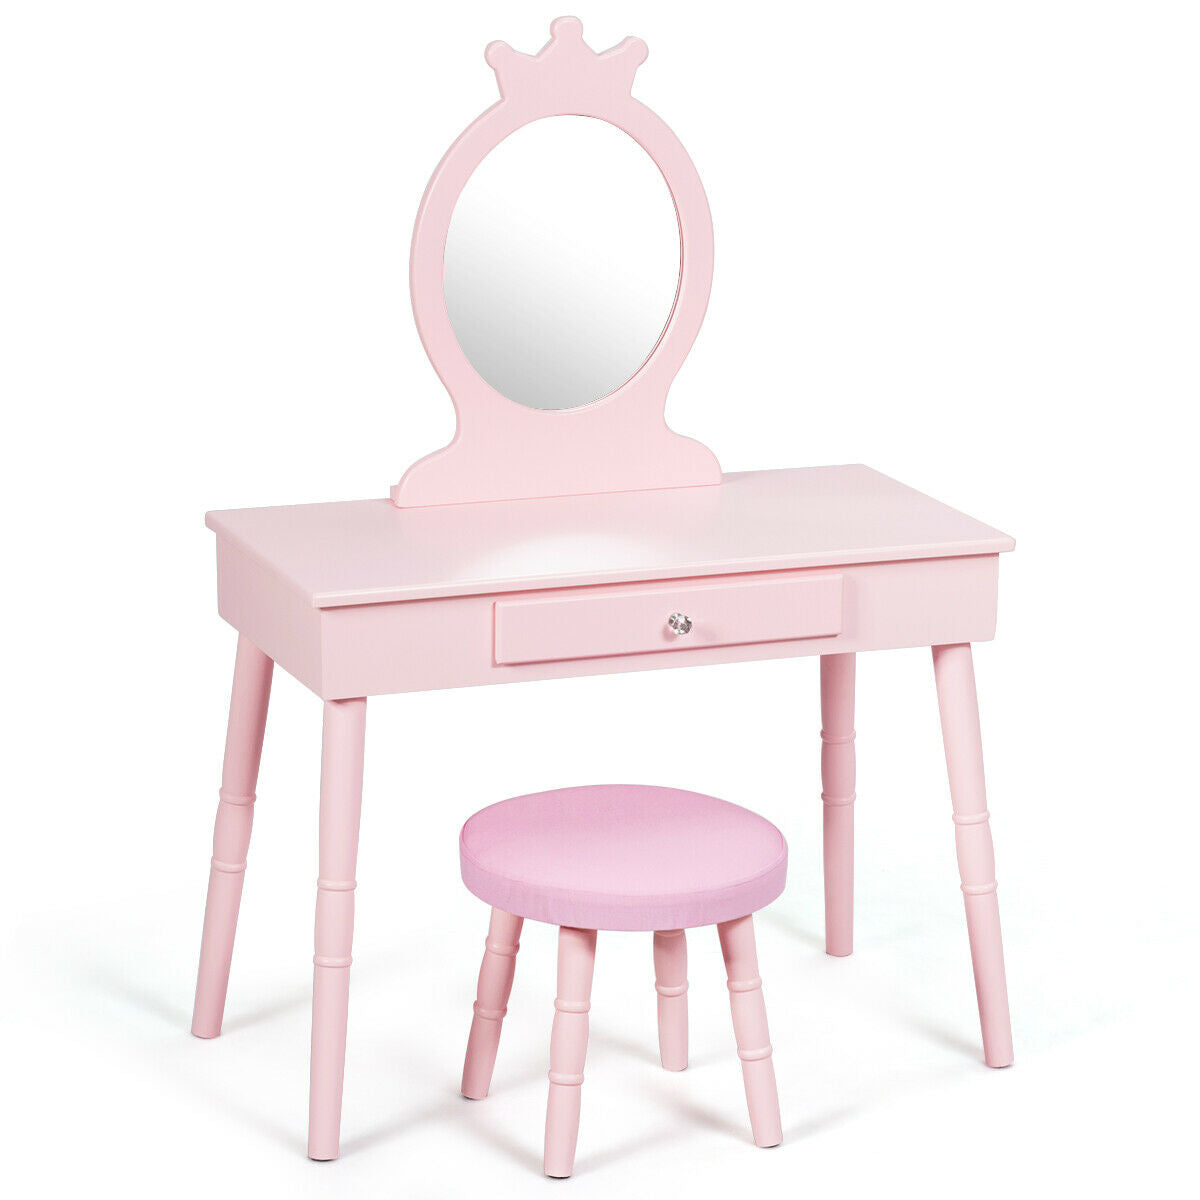 Extremely Well Built and Very Sturdy Structure:  prioritizing your child's safety. Unlike other so-called wood vanity tables that use chipboard, we have utilized a high-quality MDF frame and real wood legs. This ensures that our vanity set will serve your child much longer than those made of chipboard or plastic.